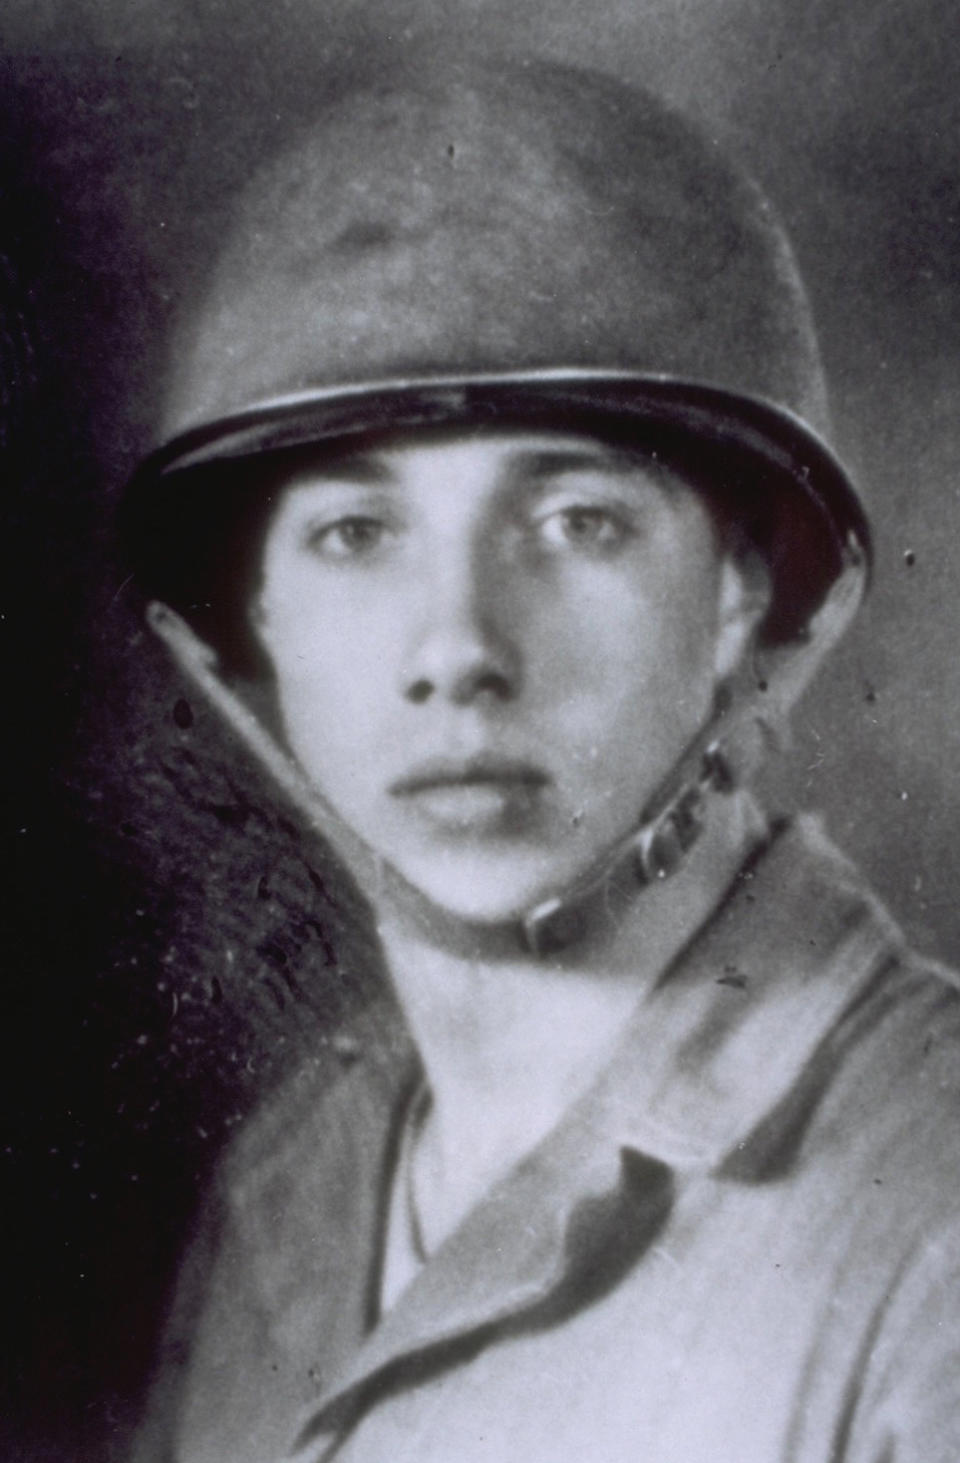 Bob Dole enlisted in the U.S. Army in 1942. (Brooks Kraft / Sygma via Getty Images file)